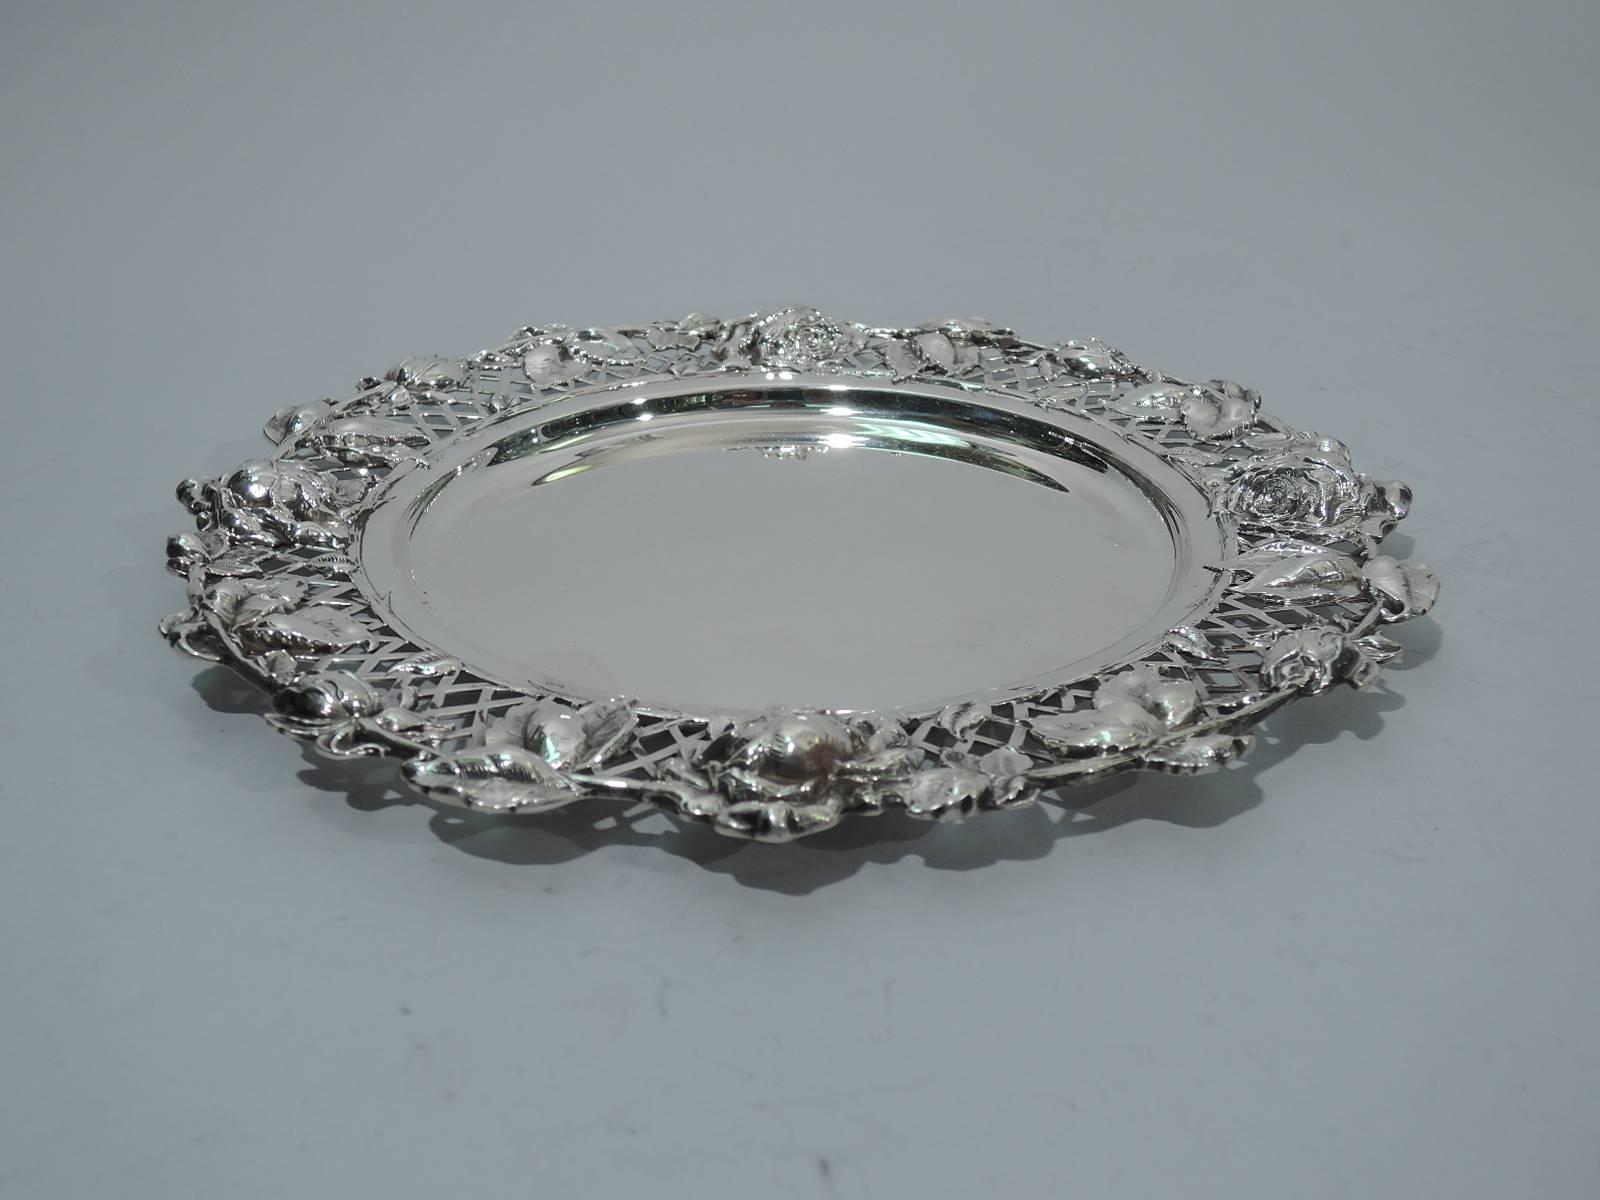 Set of ten sterling silver plates. Made by Redlich in New York, circa 1900. Each: solid well bordered by naturalistic roses, some buds, others bloomed, applied to trellis. Hallmark includes model no. 4676P. Excellent condition.

Dimensions: H 1/2